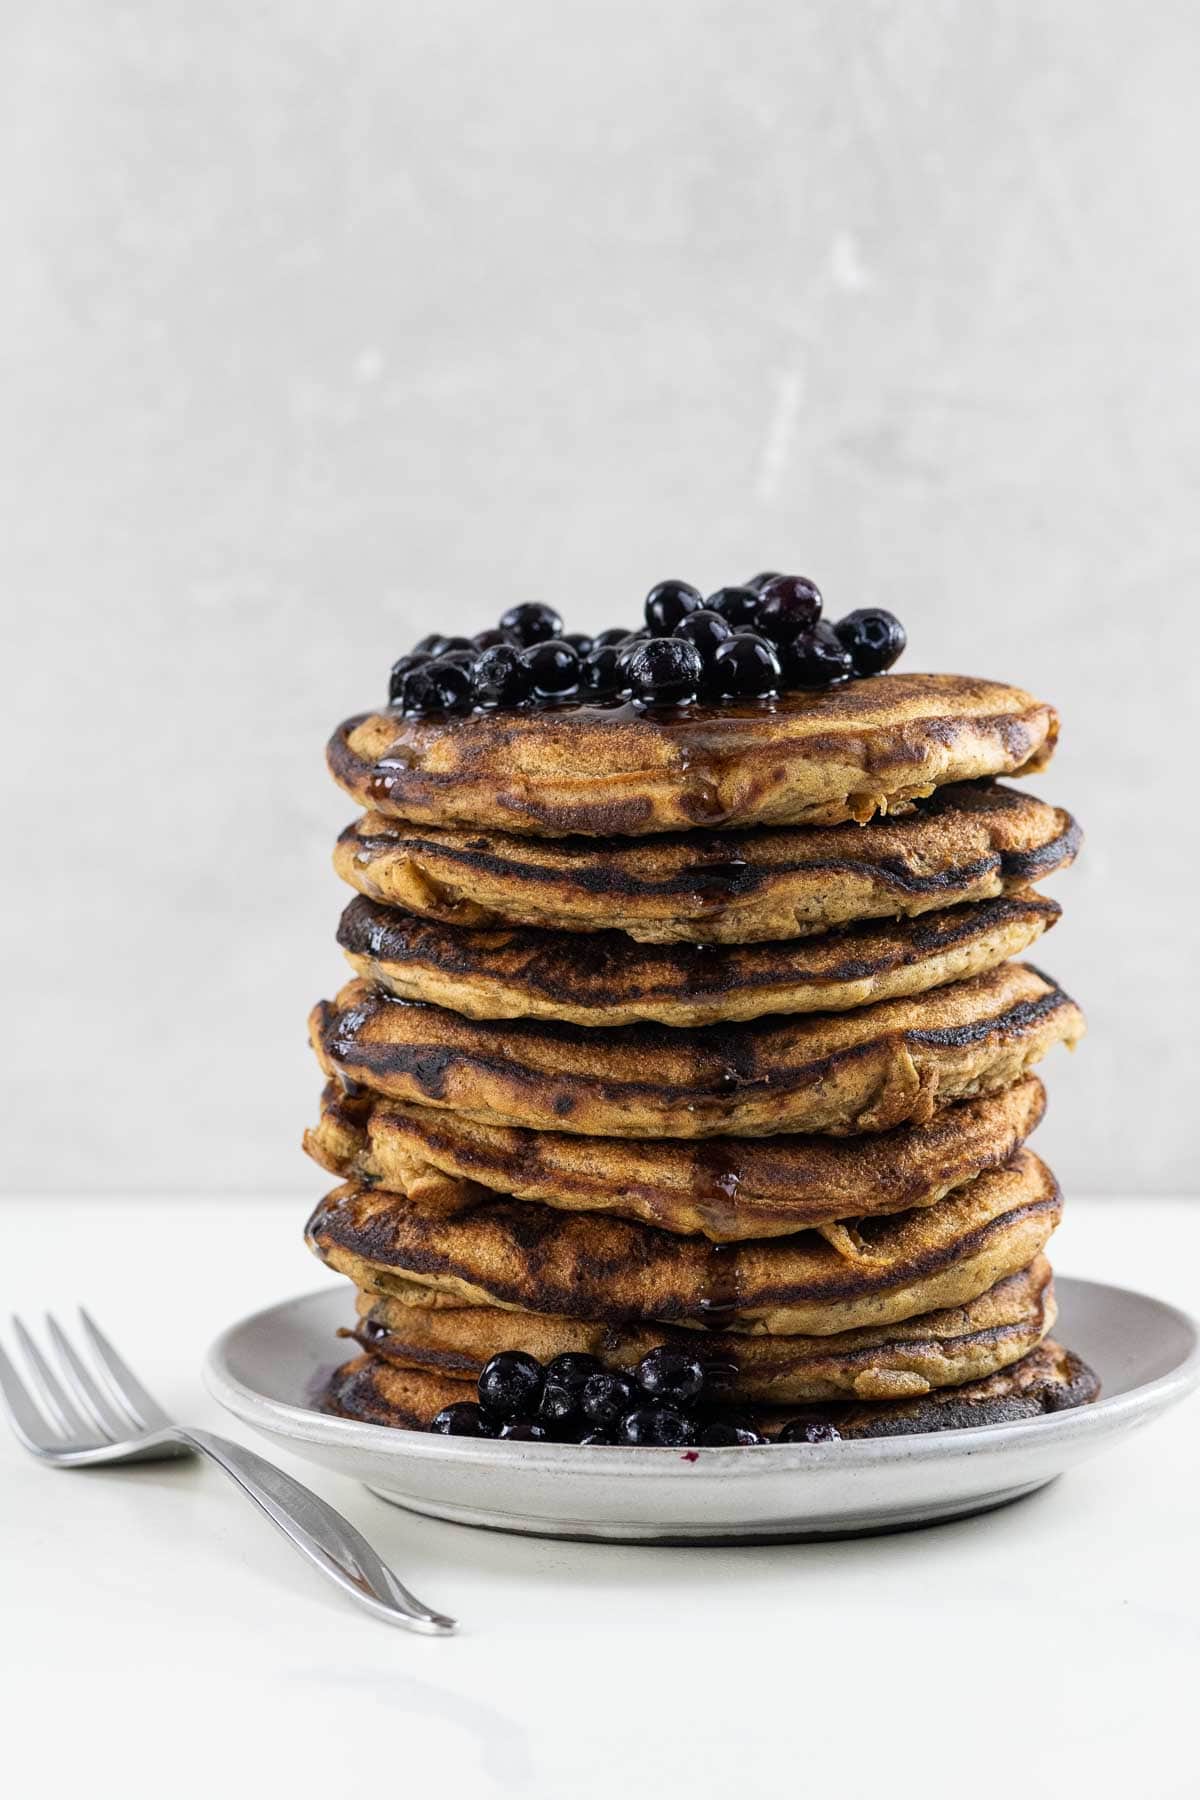 vegan banana pancakes stacked on a plate with blueberries, maple syrup, and a fork